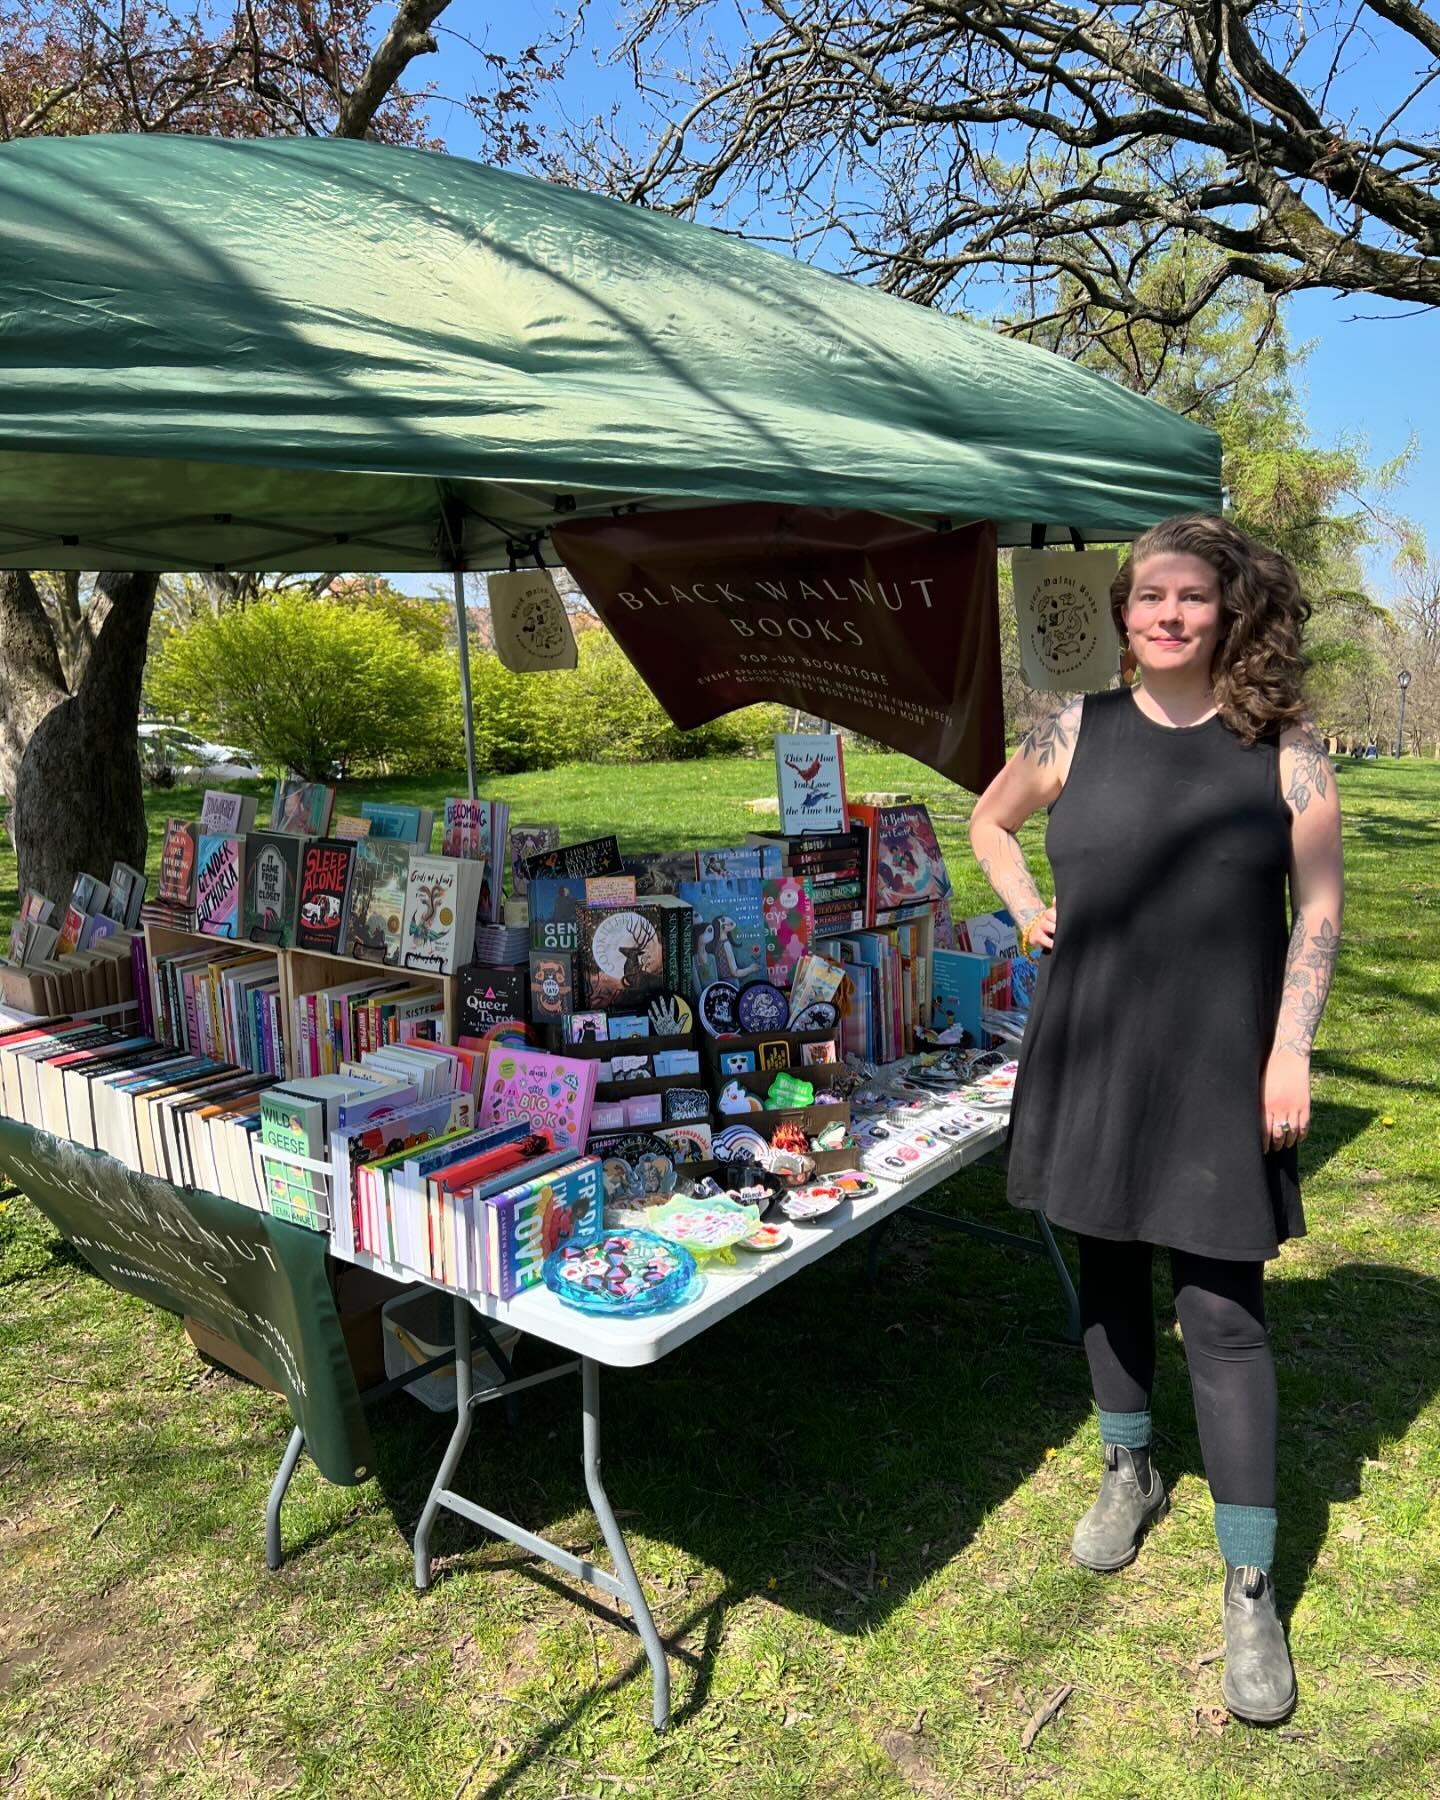 We&rsquo;re all set up for the @abiggaymarket in Washington Park in Albany! This is the best market and I&rsquo;m so excited to see some familiar faces and meet new folks! 🌈📚✨